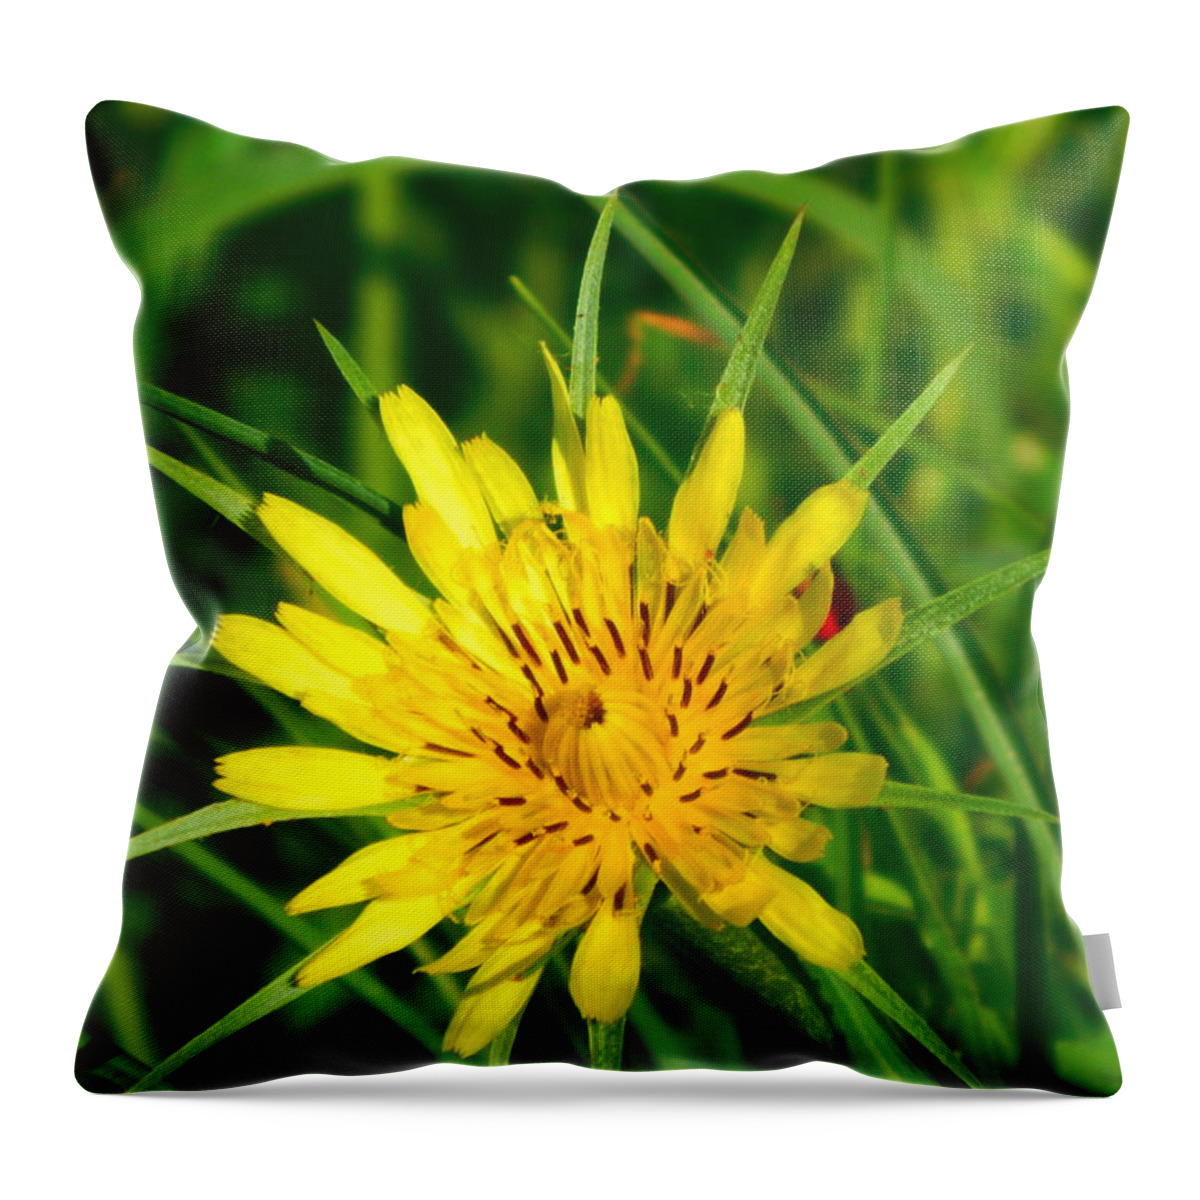 Oklahoma Throw Pillow featuring the photograph Wildflower by Virginia White